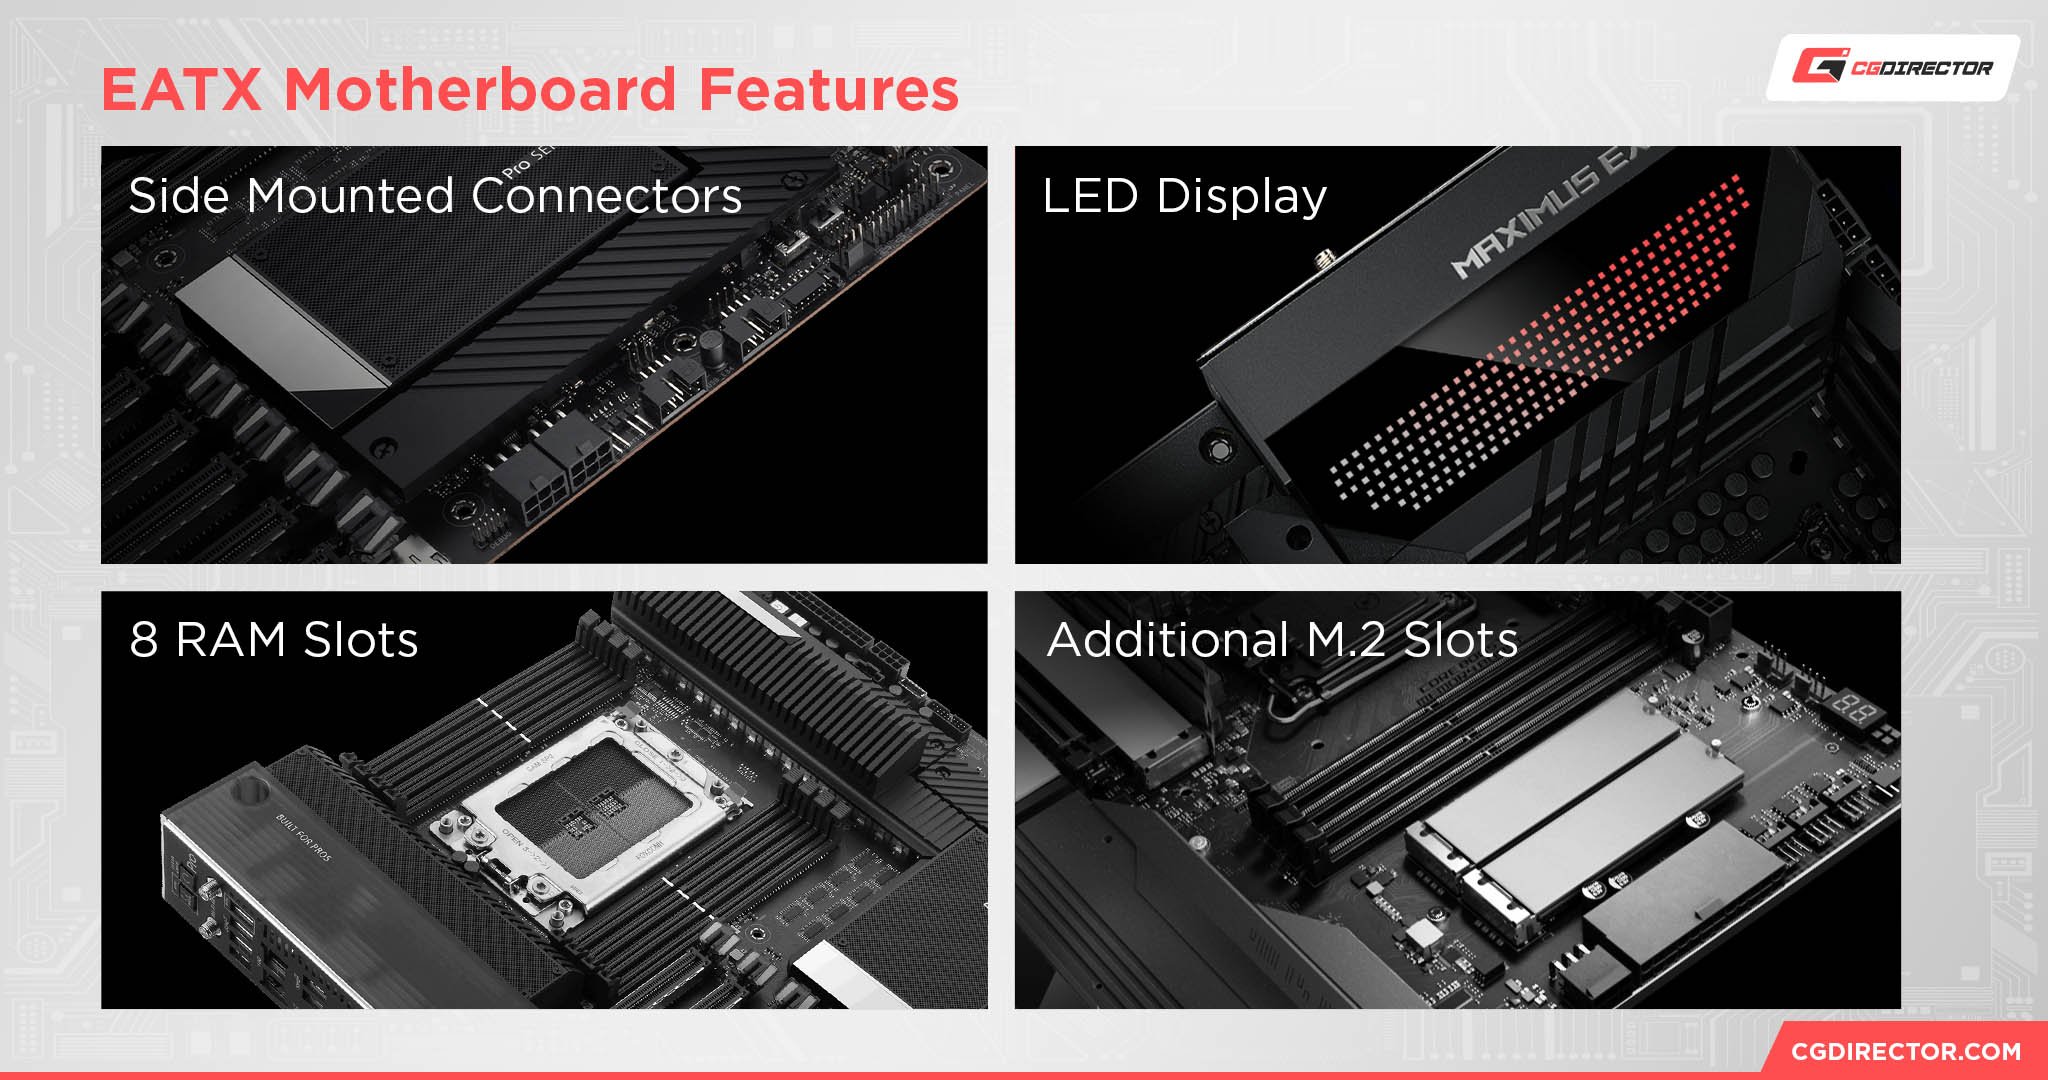 EATX Motherboard Features